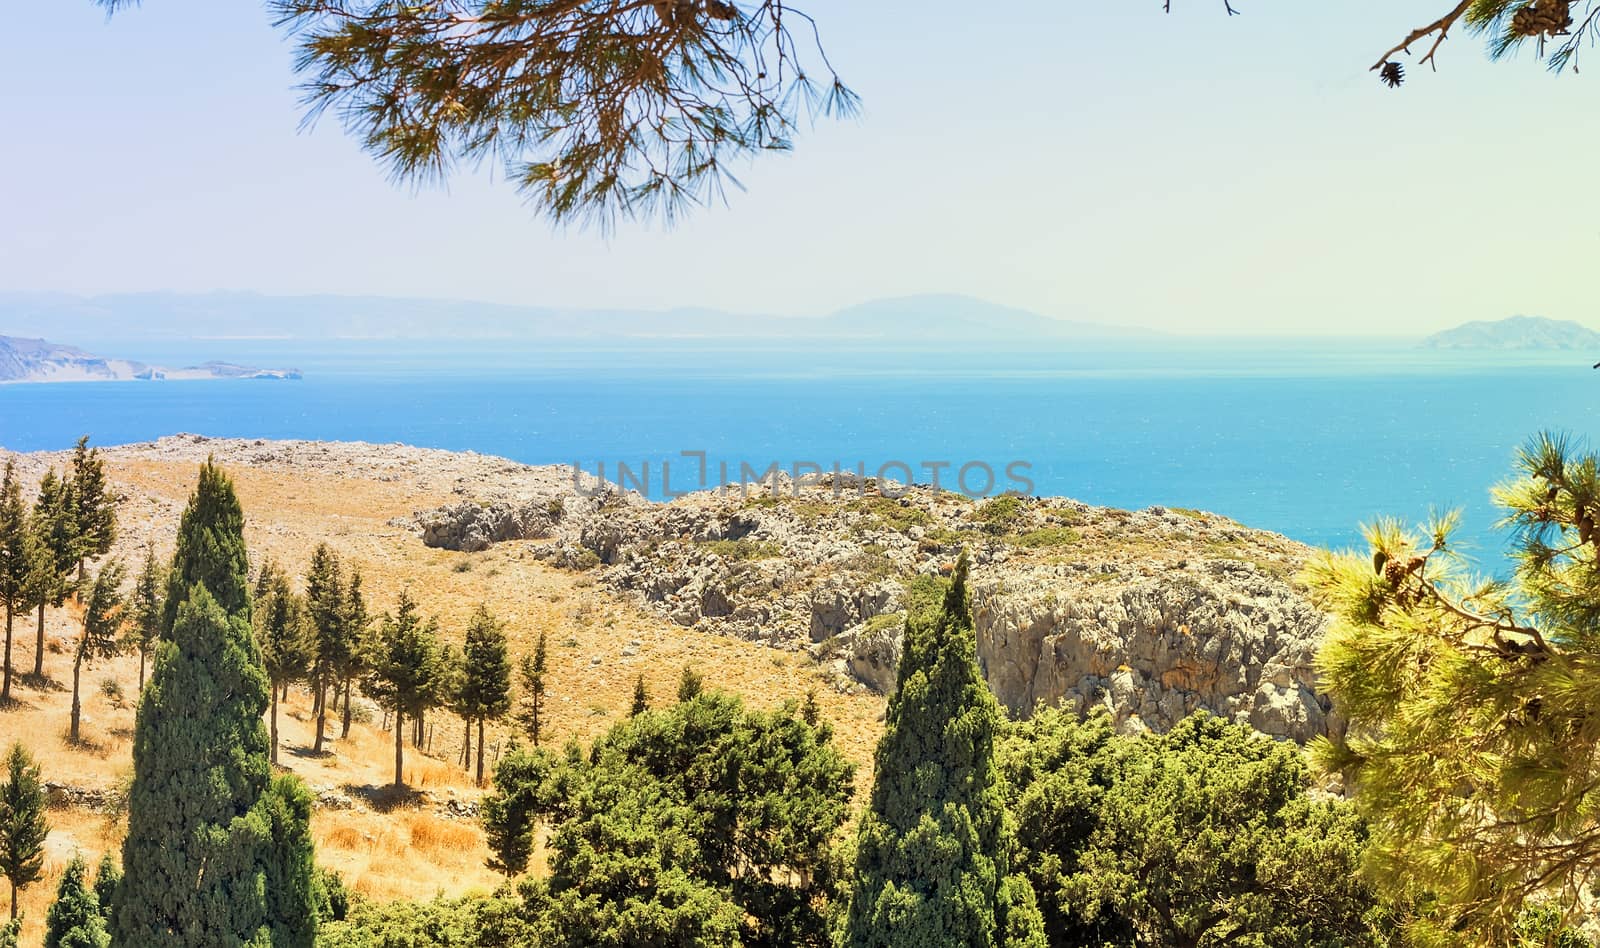 Beautiful summer landscape with sea and mountain views with vegetation. The Island Of Crete, Greece.